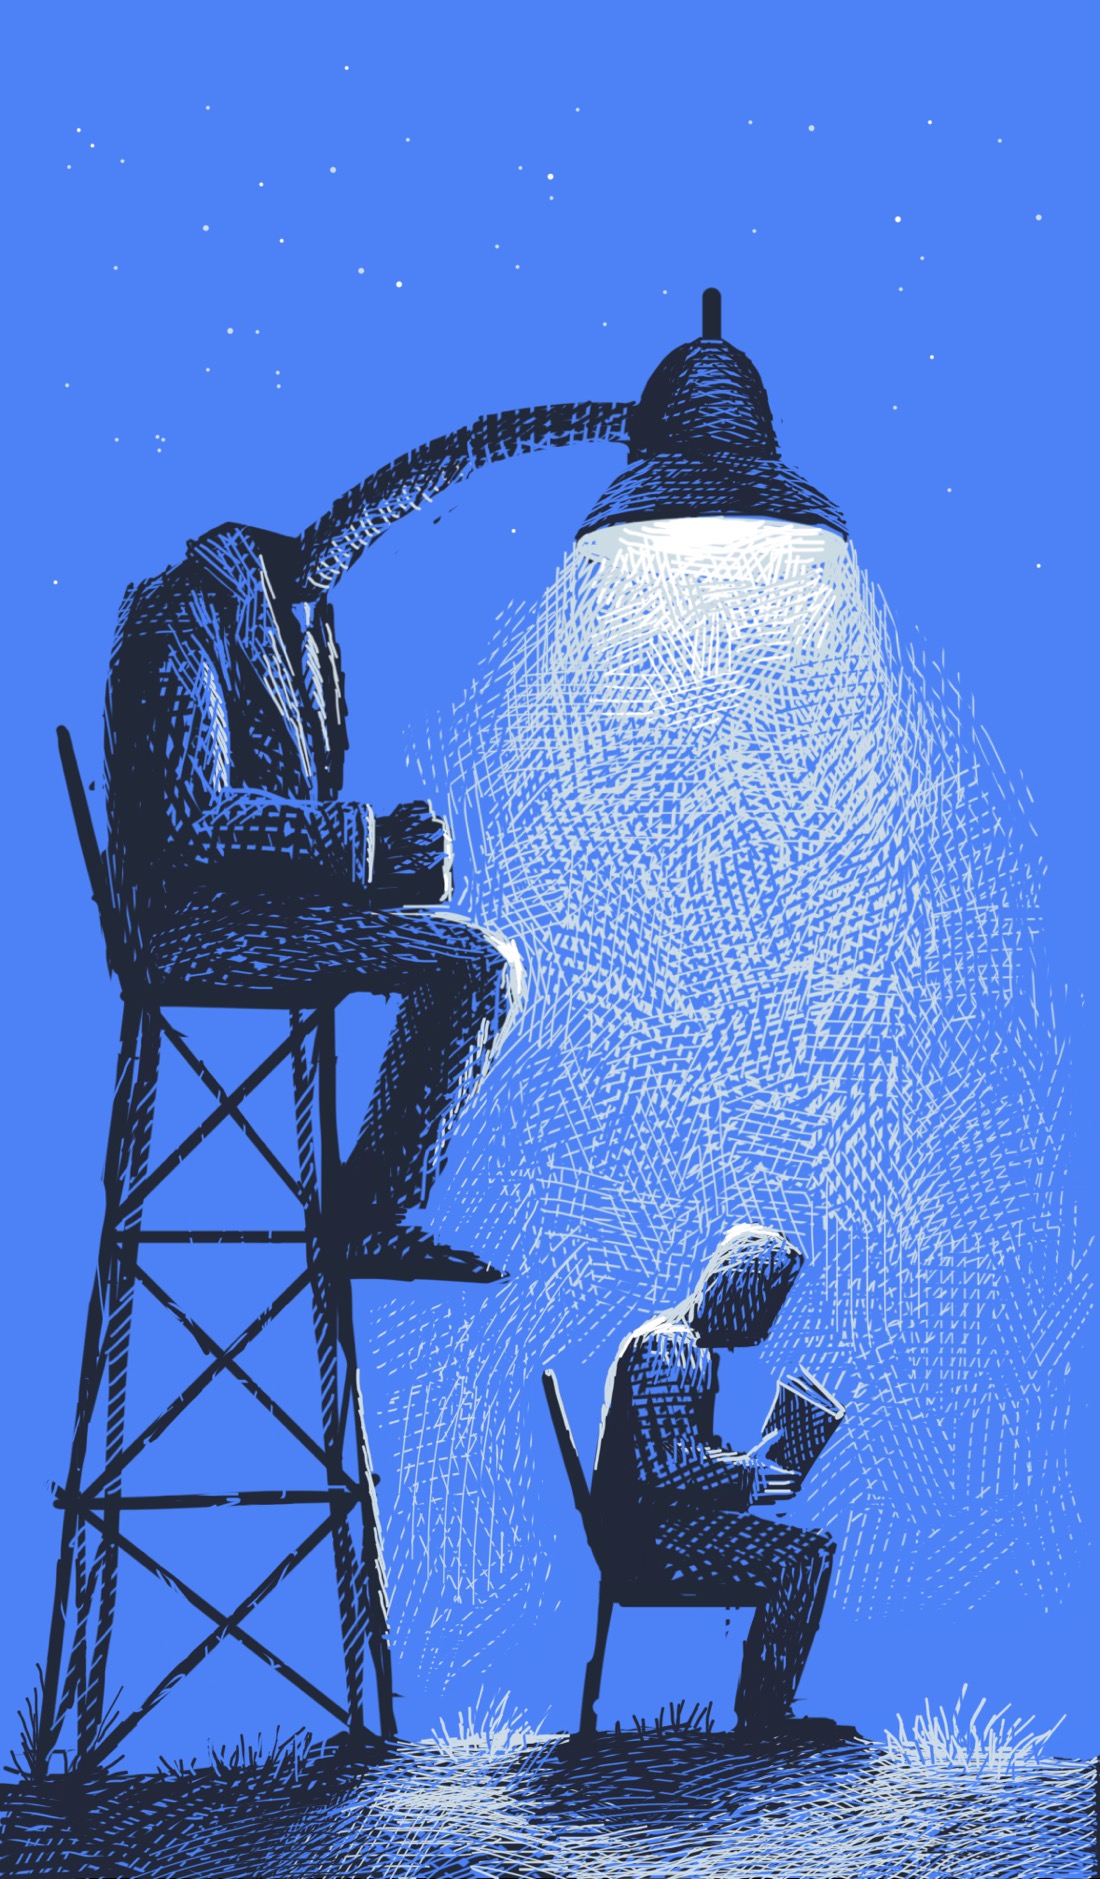 An imposing figure sits in a high chair on trusses, similar to a lifeguard's chair. The figure is wearing a suit and has a long-necked desk lamp for a head. Below the figure sits a person in a normal-sized chair, reading a book. The scene is at night; the desk lamp person casts a light over the person sitting in a chair reading a book.